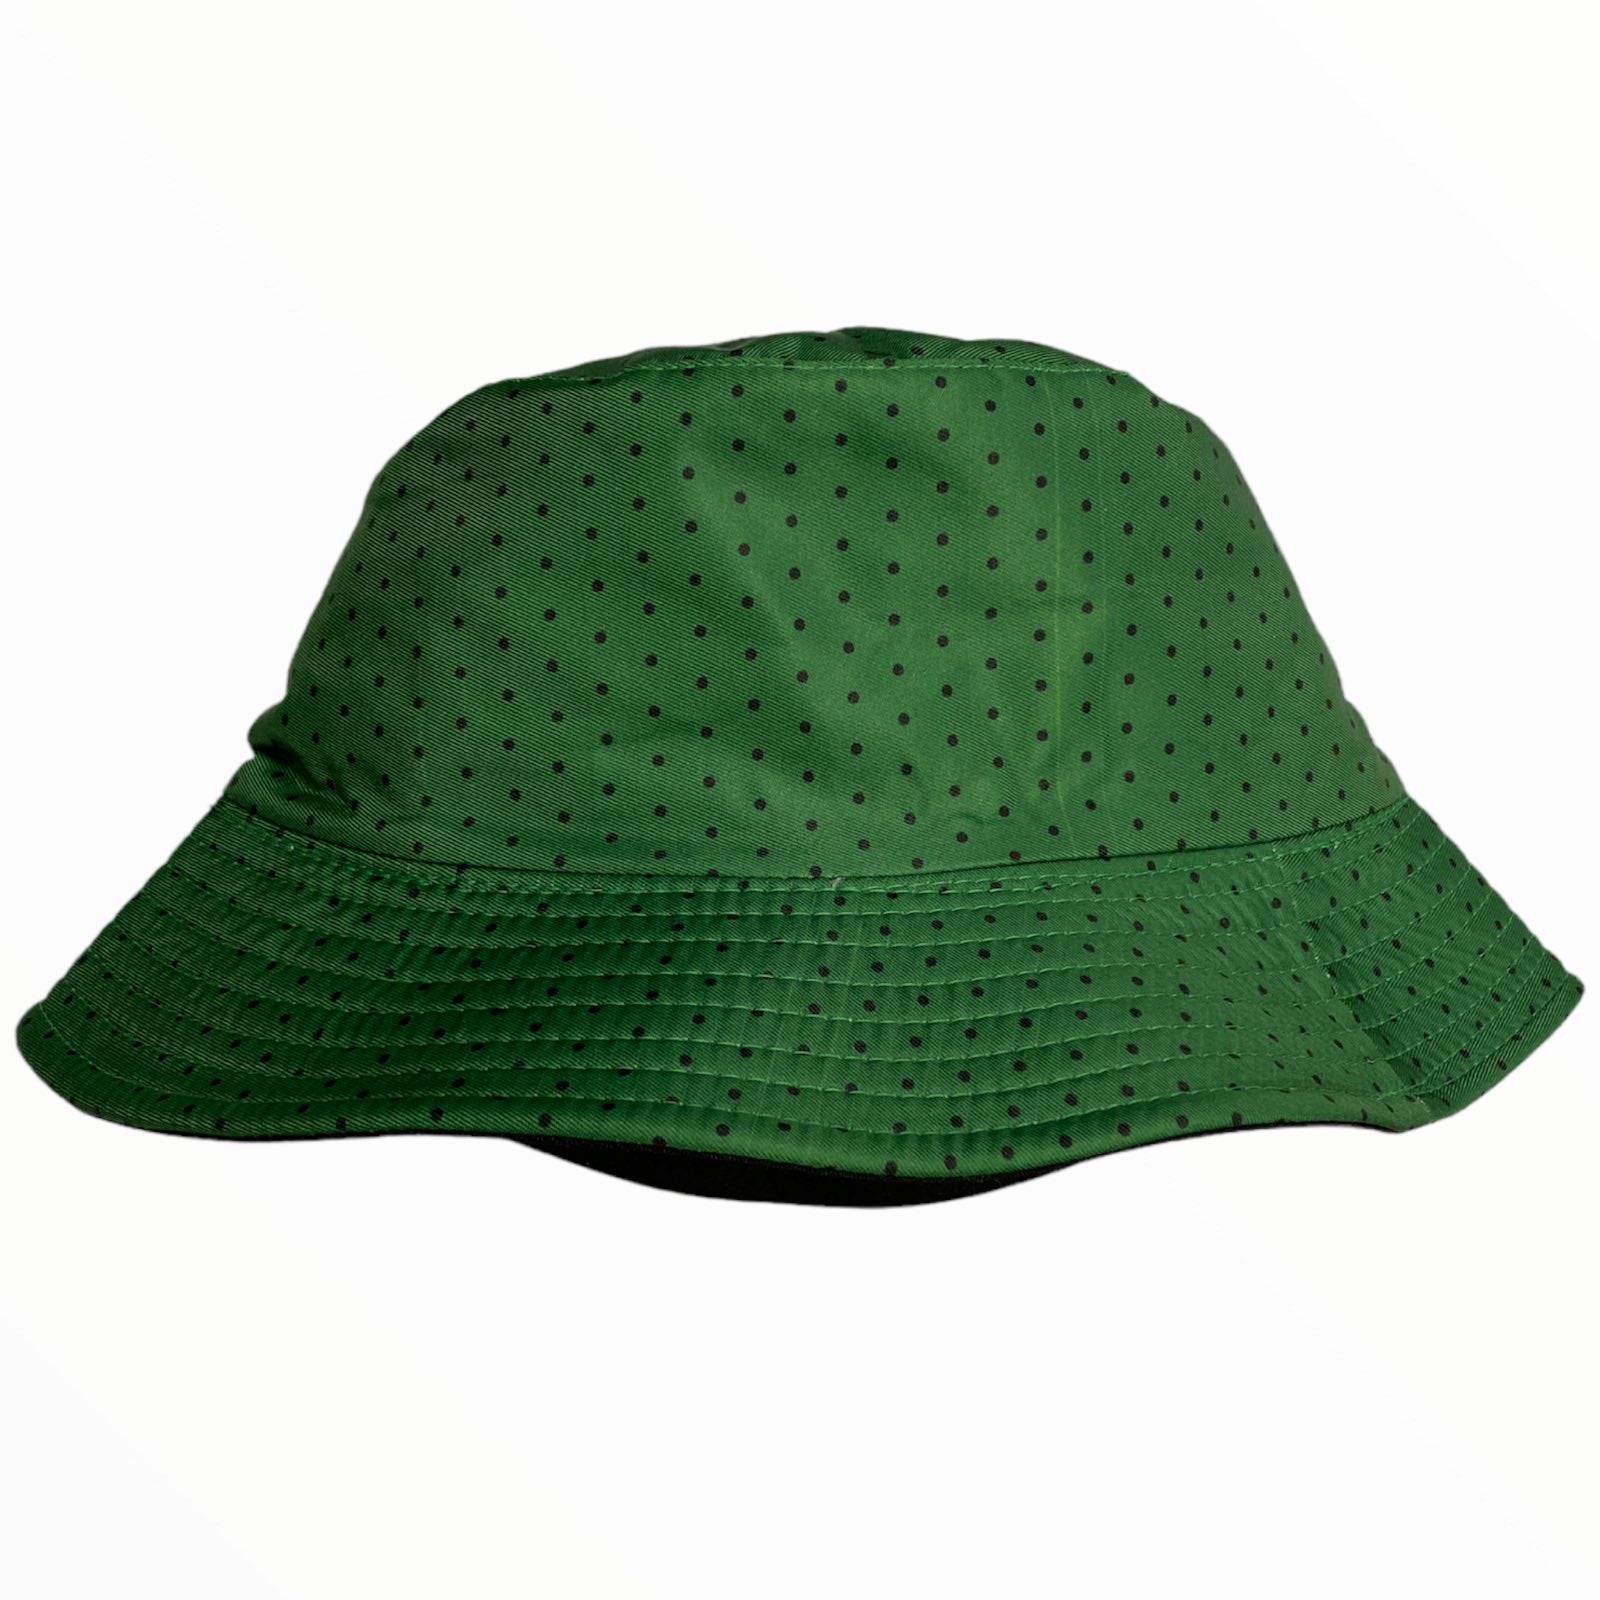 Green pois-black double face bucket hat